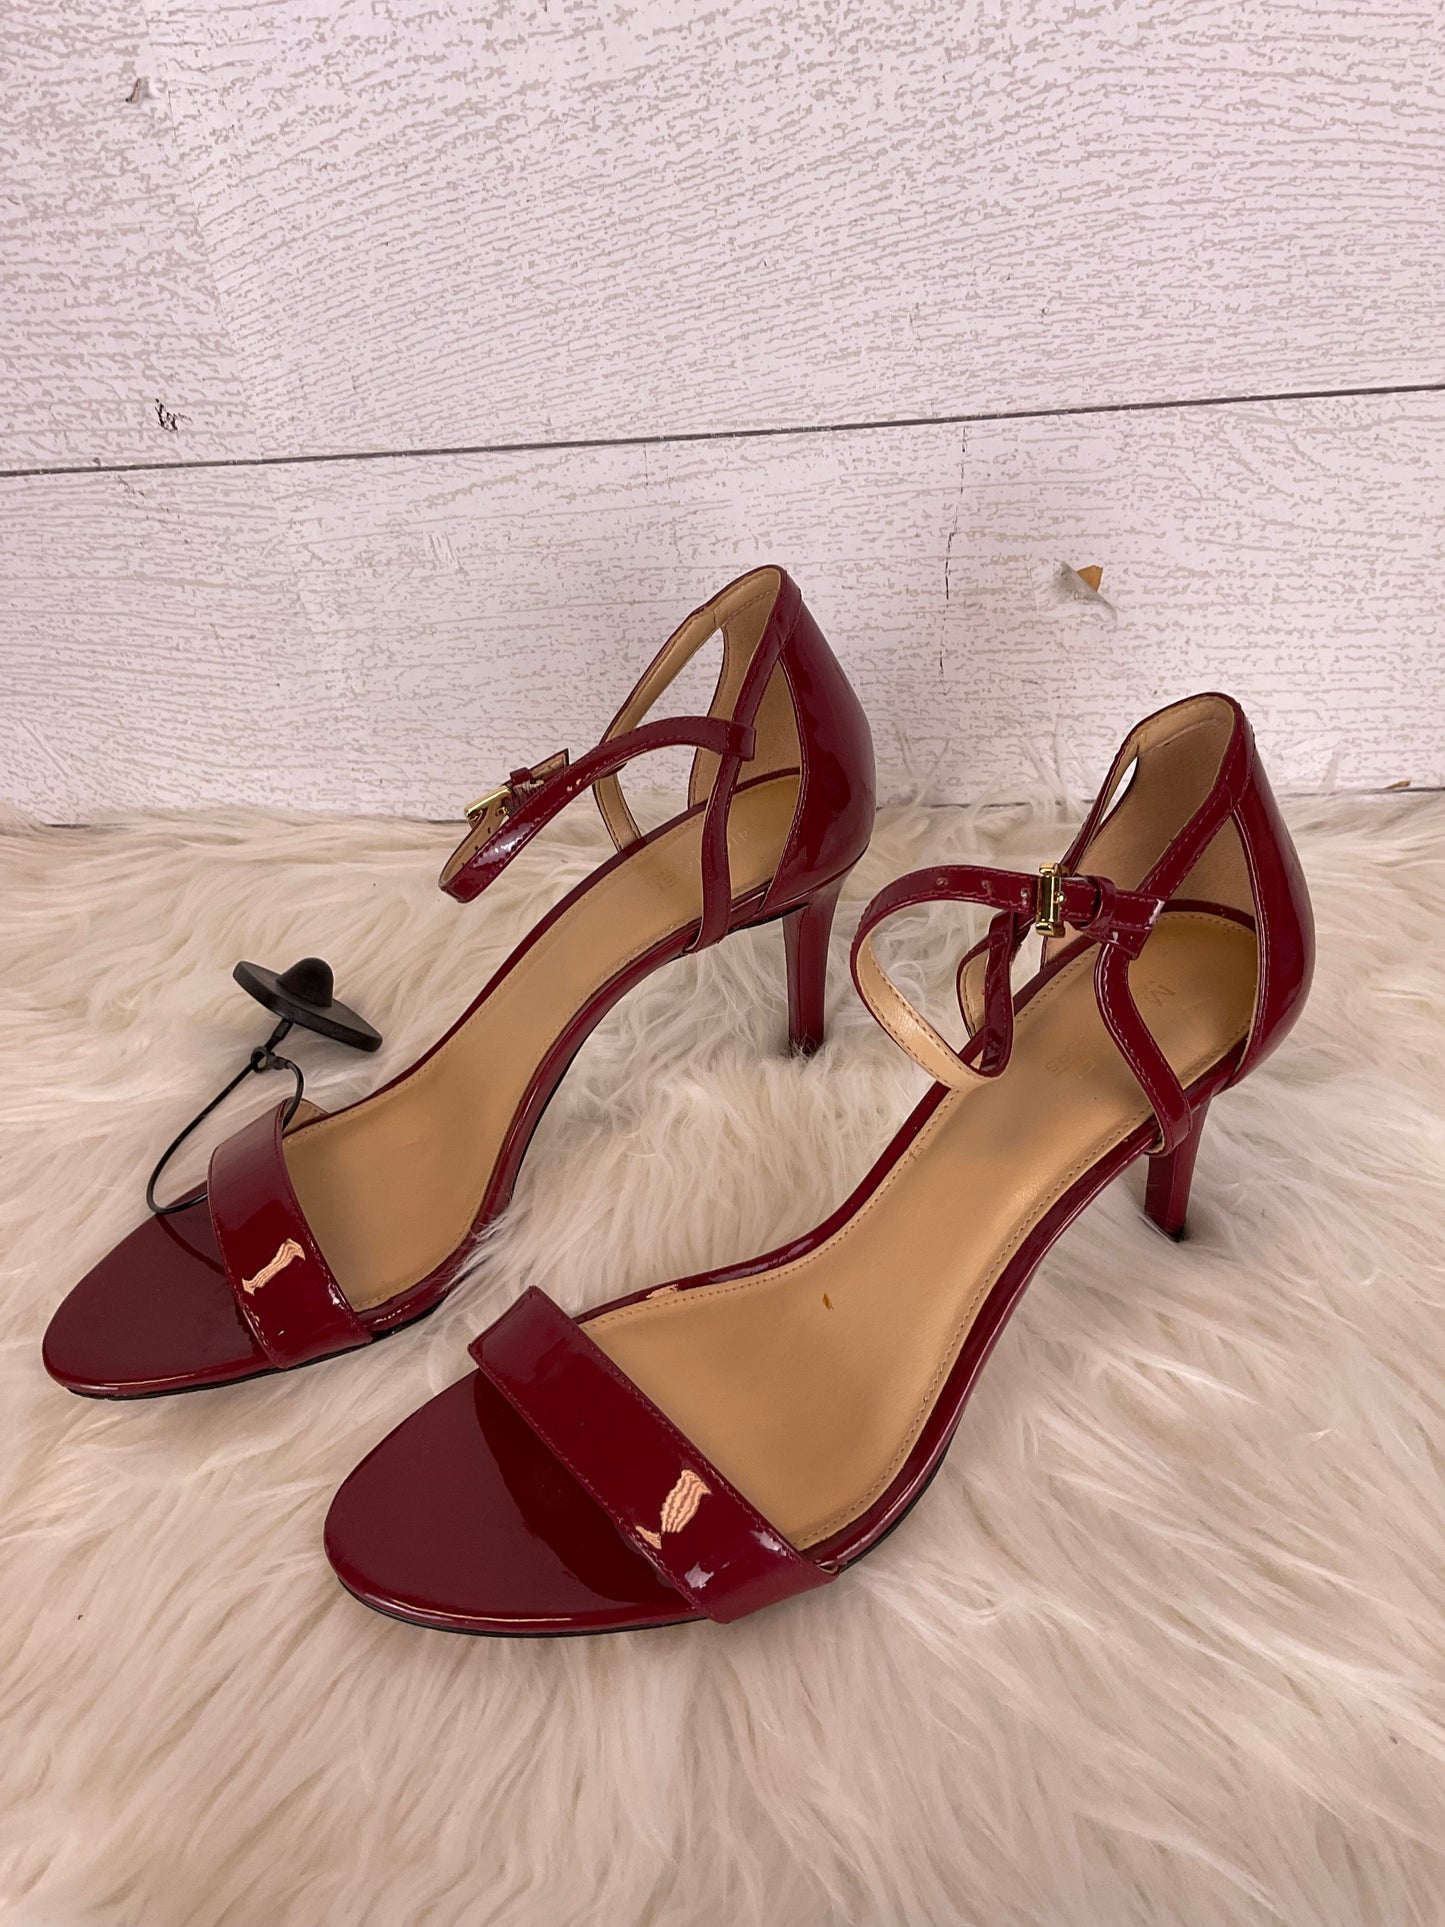 Red Sandals Heels Stiletto Michael By Michael Kors, Size 9